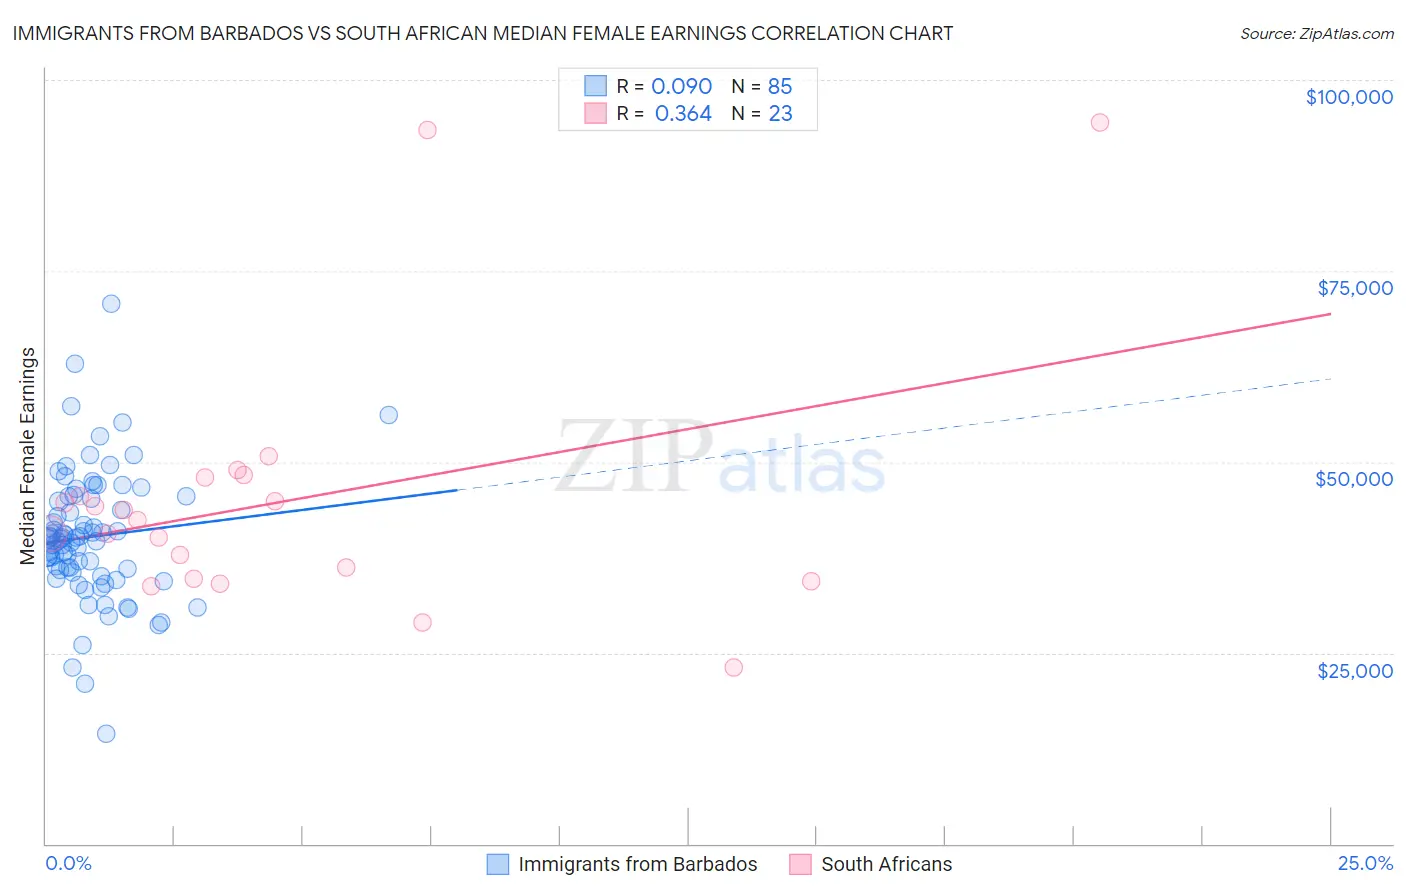 Immigrants from Barbados vs South African Median Female Earnings